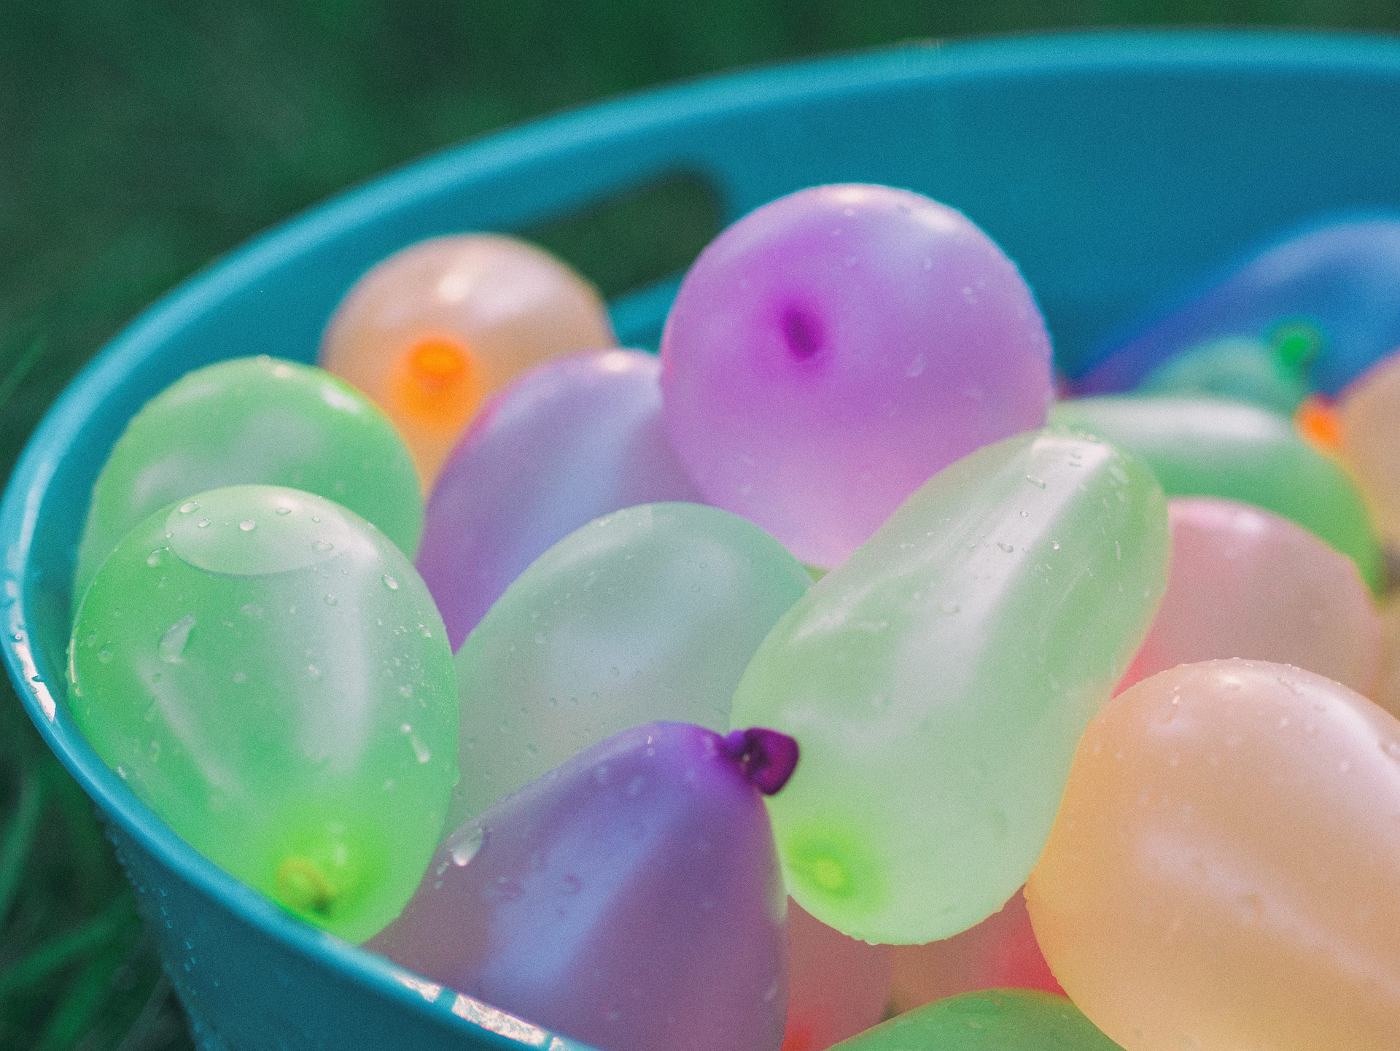 Bucket of water balloons - 18 entertaining activities to do for kids